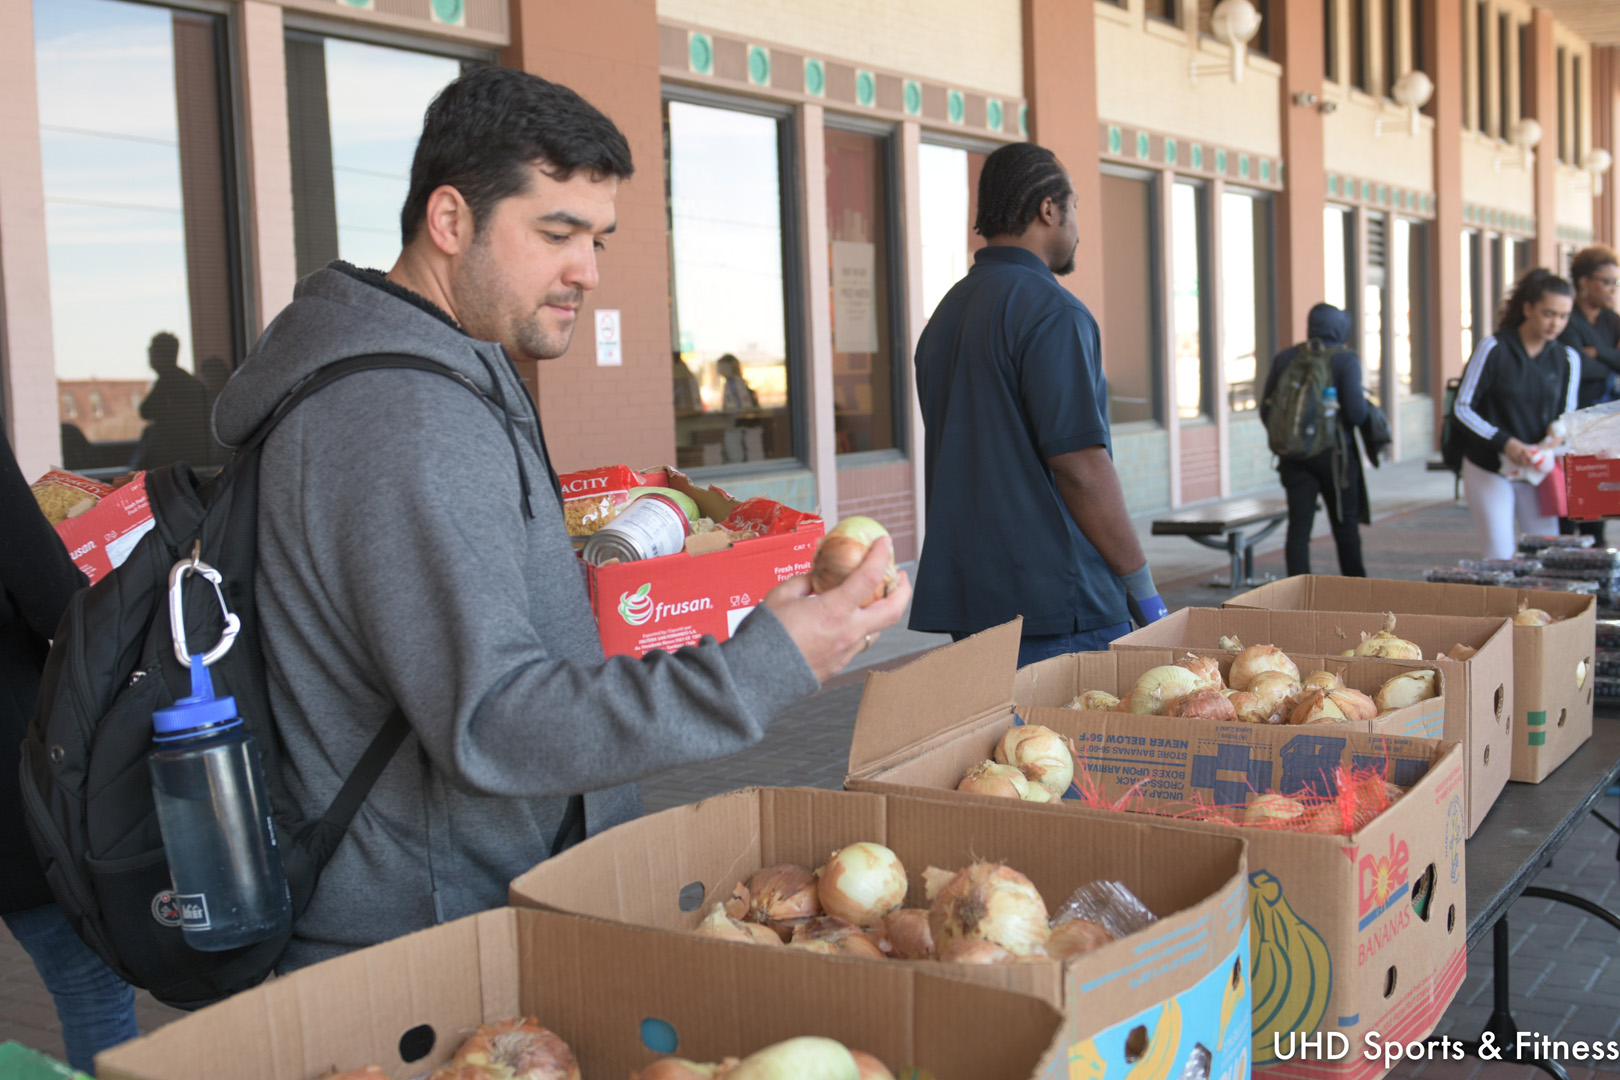 Student inspecting an onion at a food distribution event.